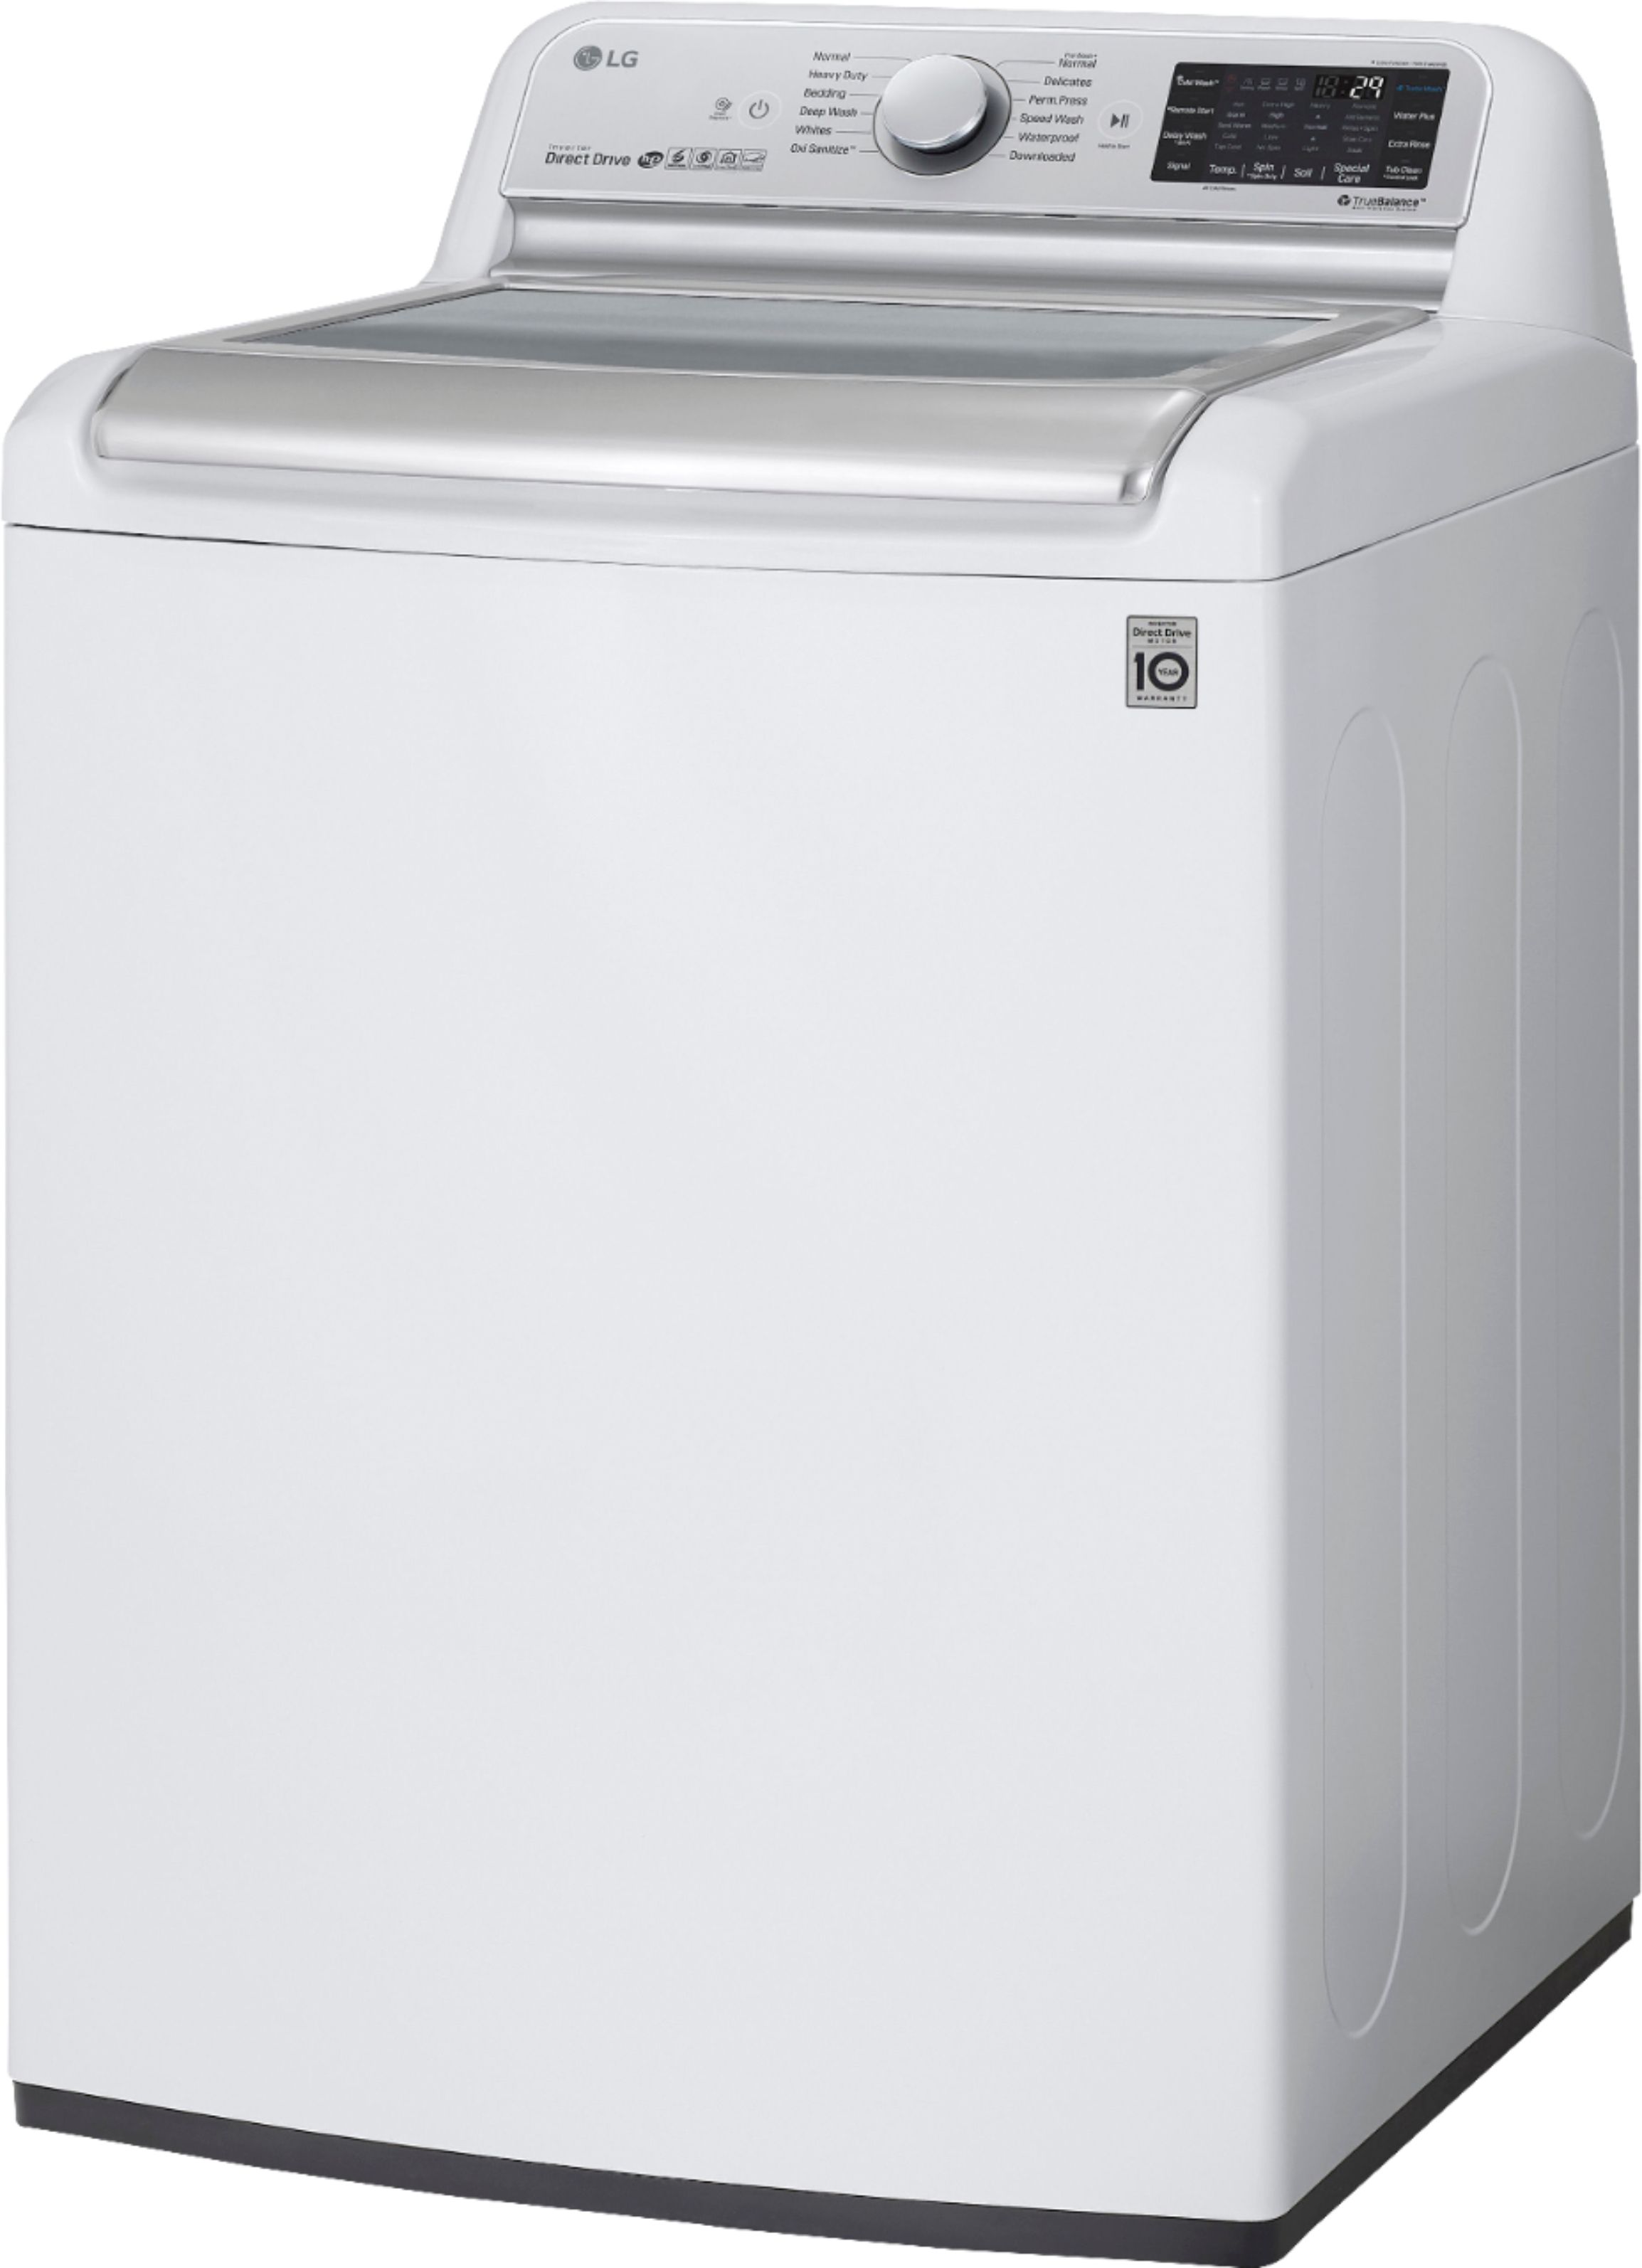 Left View: LG - 5.5 Cu. Ft. High-Efficiency Smart Top Load Washer with TurboWash3D Technology - White